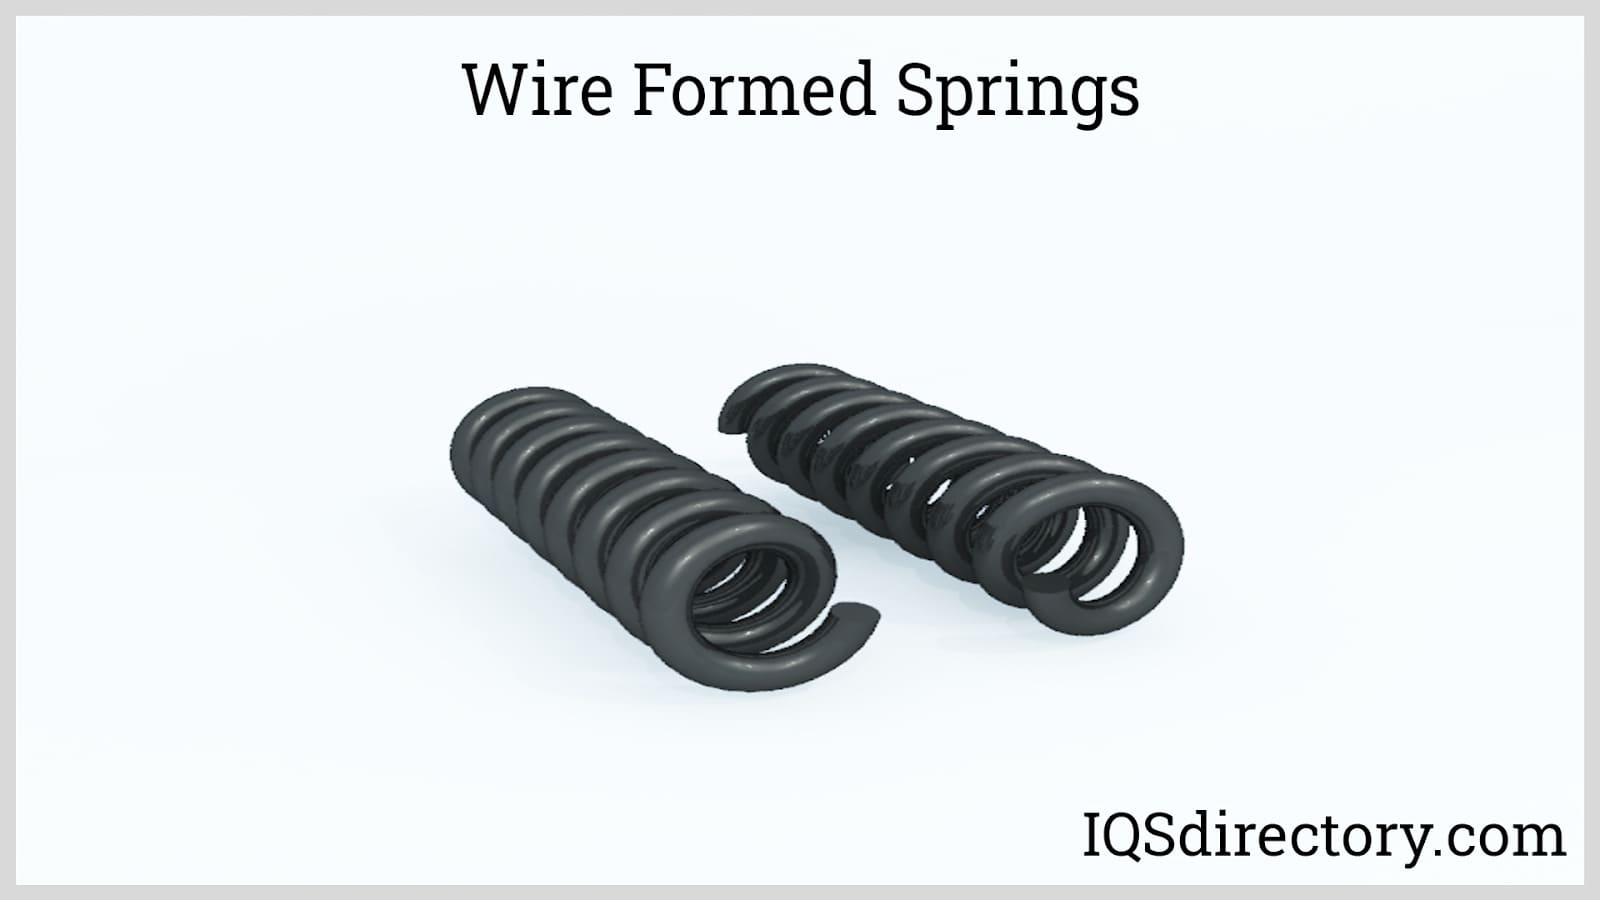 Wire Formed Springs